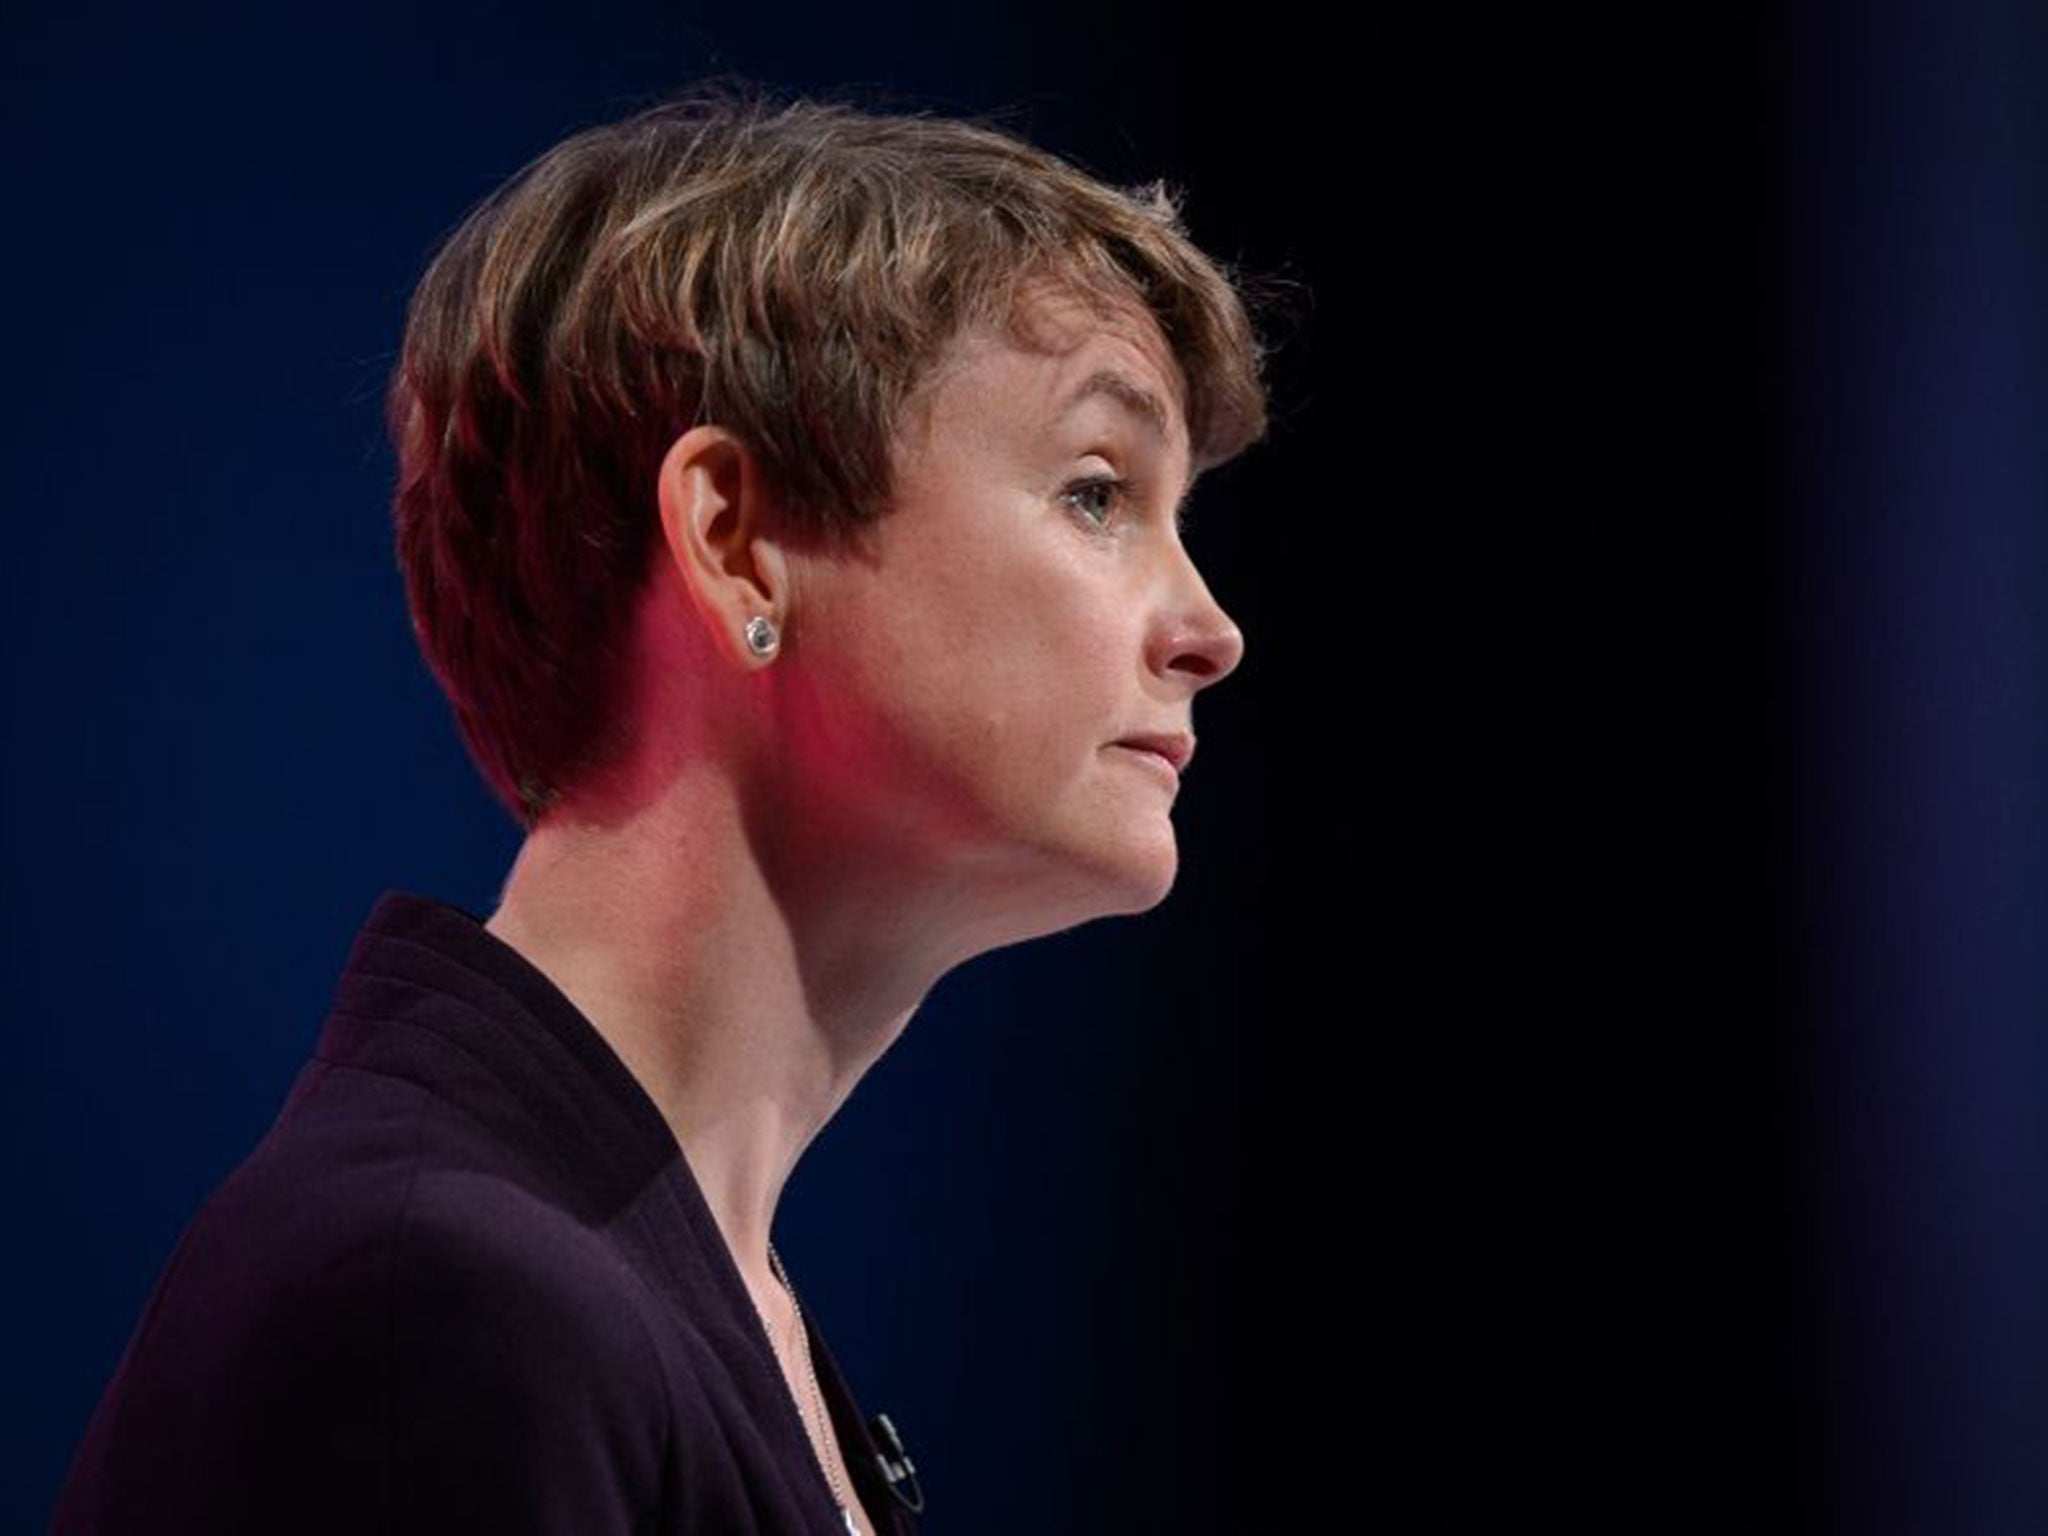 Yvette Cooper pledged tougher border controls on low-skilled workers, but fresh efforts to attract overseas students to British universities